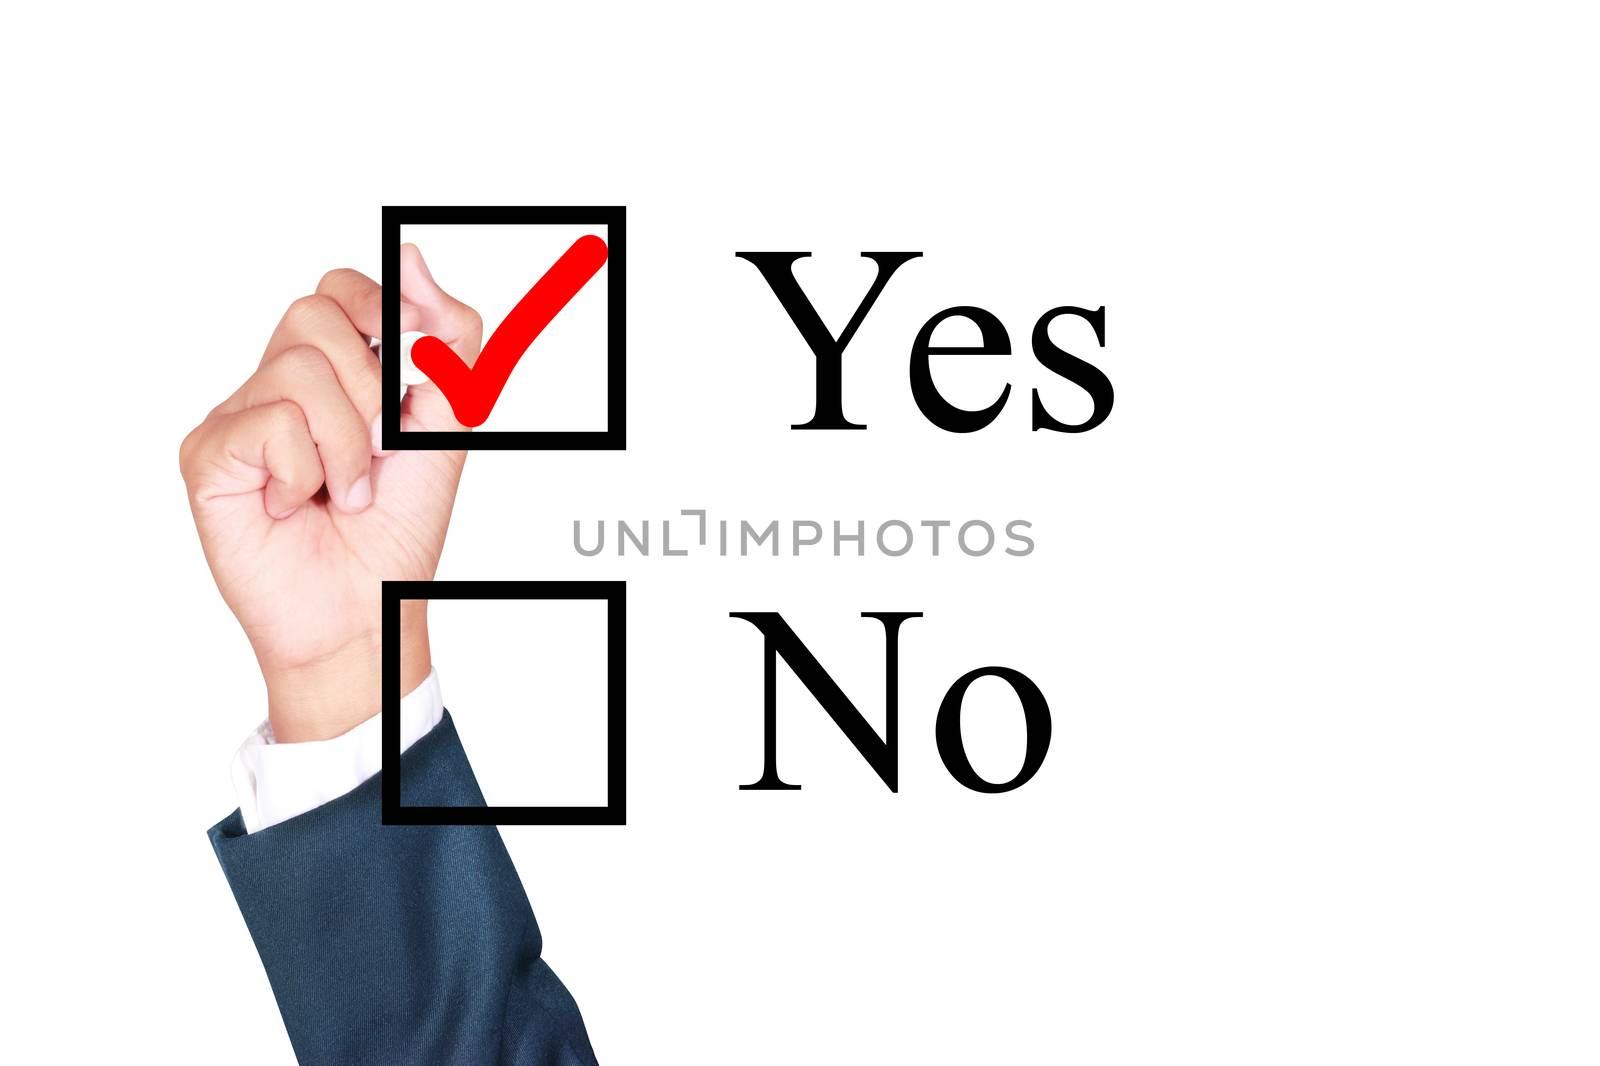 say yes tick mark on checkbox by businessman draw on whiteboard white background